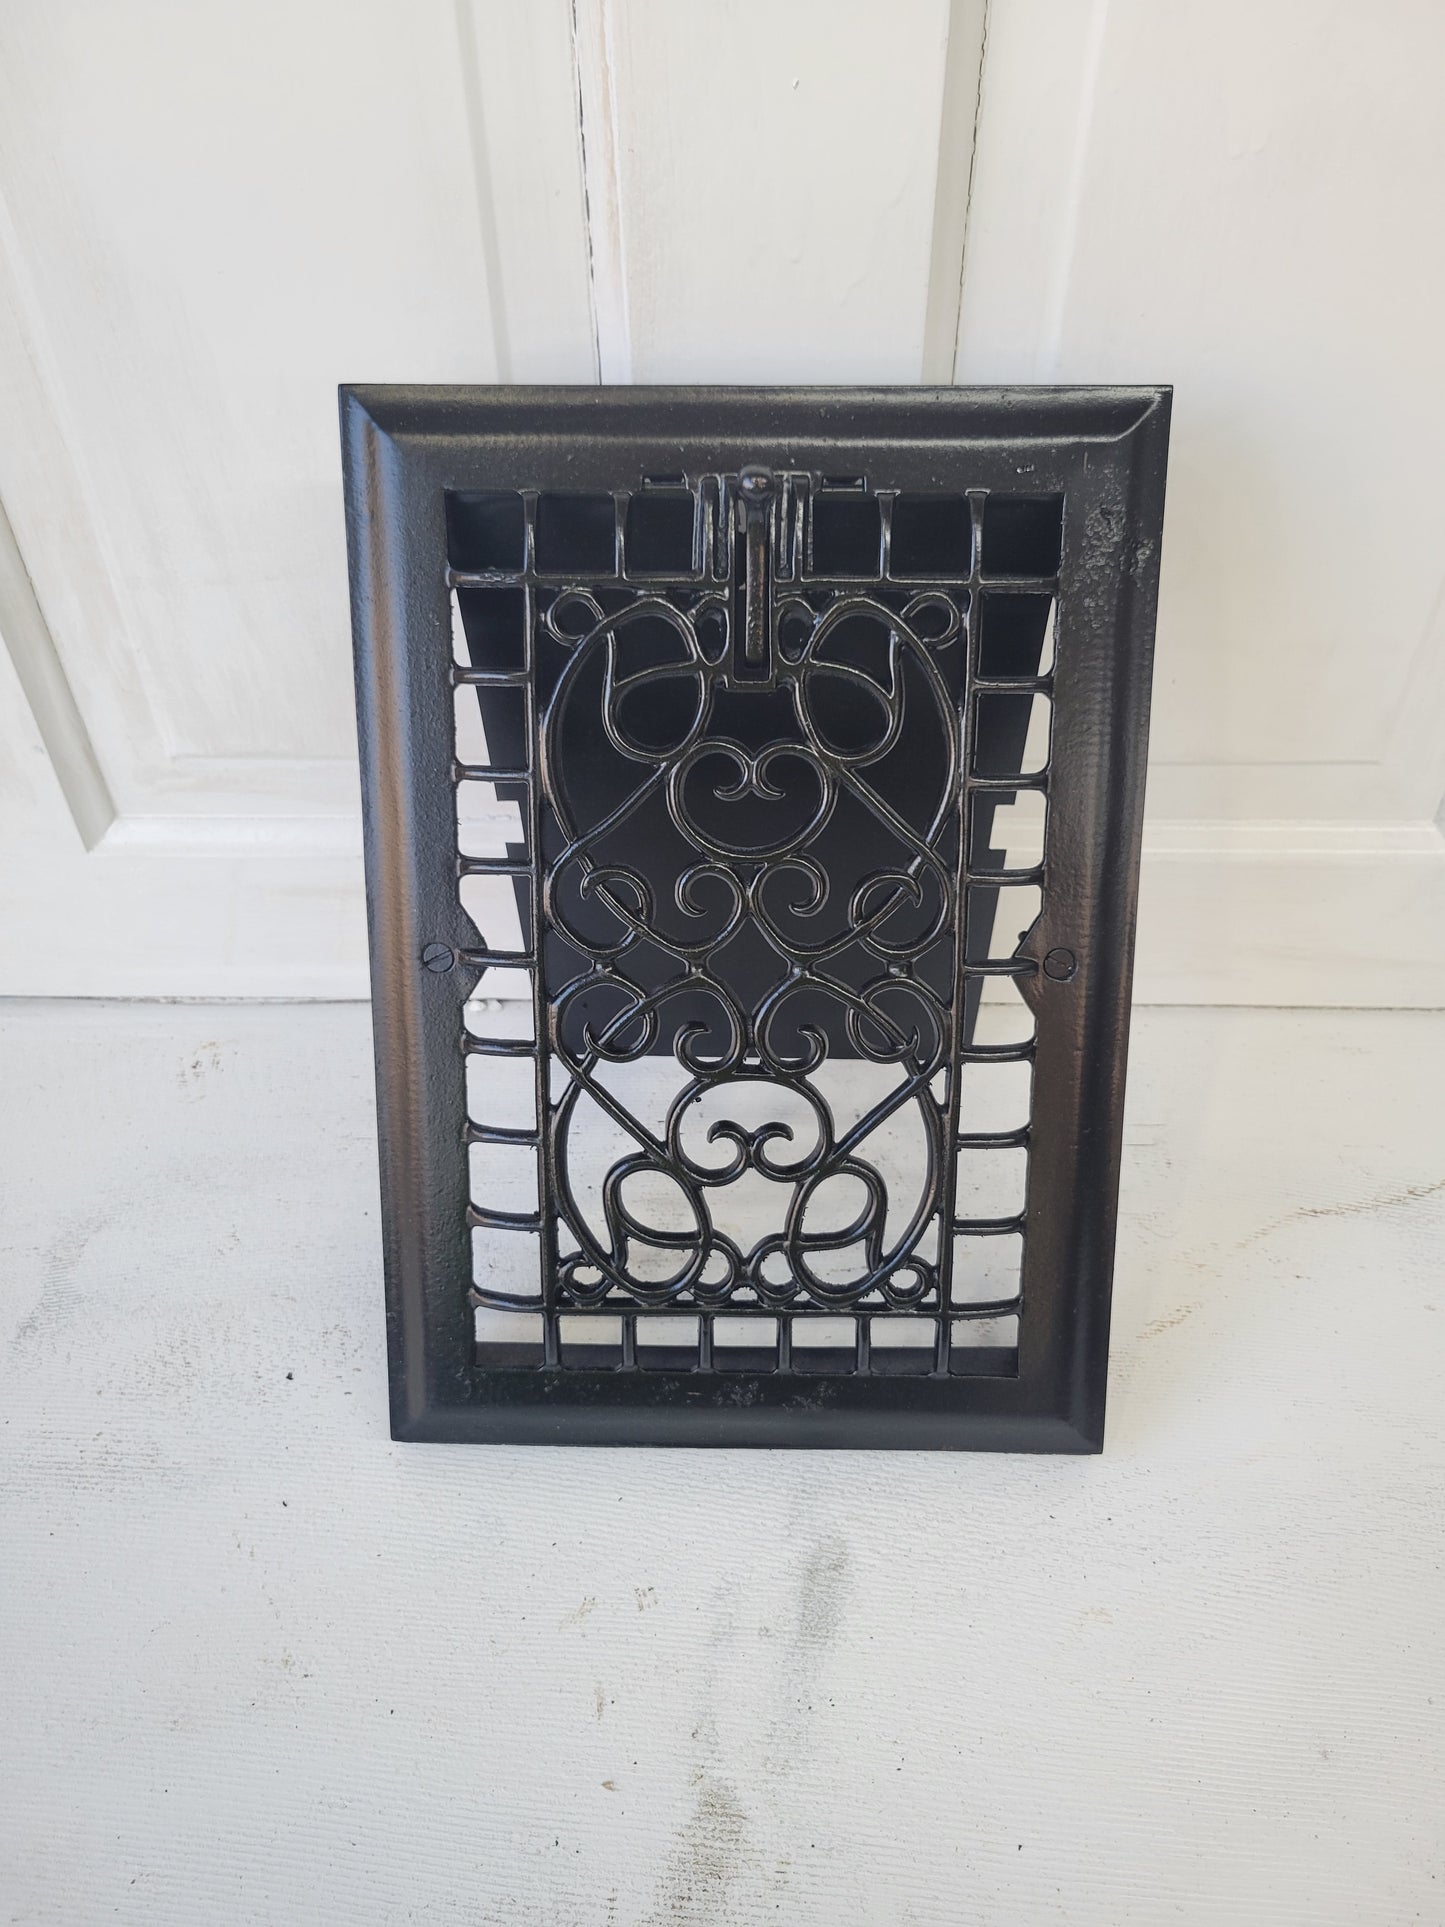 Baseboard 10 x 14 Antique Cast Iron Fancy Vent Cover, Floor Register Cover #052905